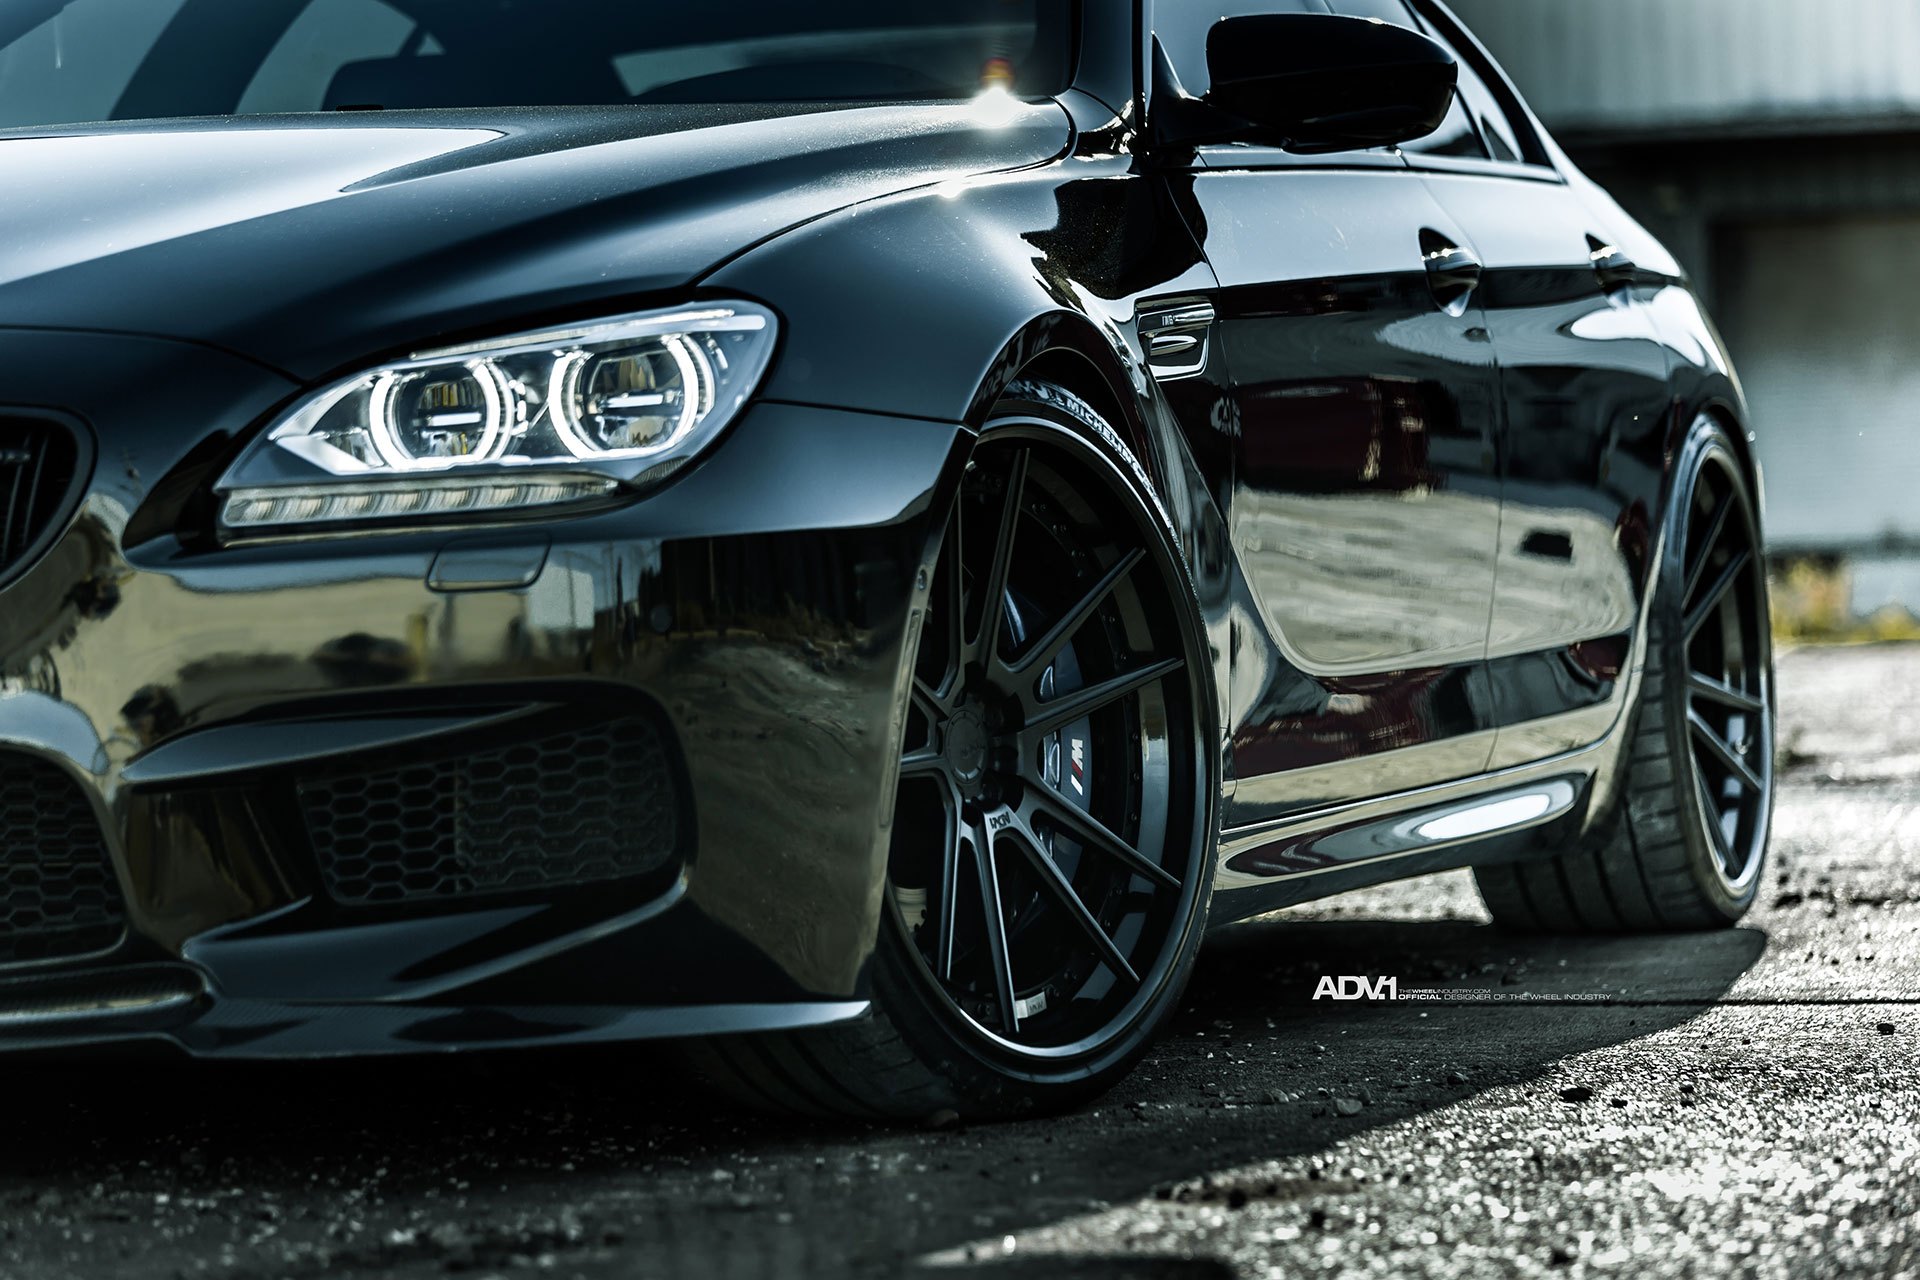 Black BMW M6 with ADV1 Concave Wheels - Photo by ADV.1